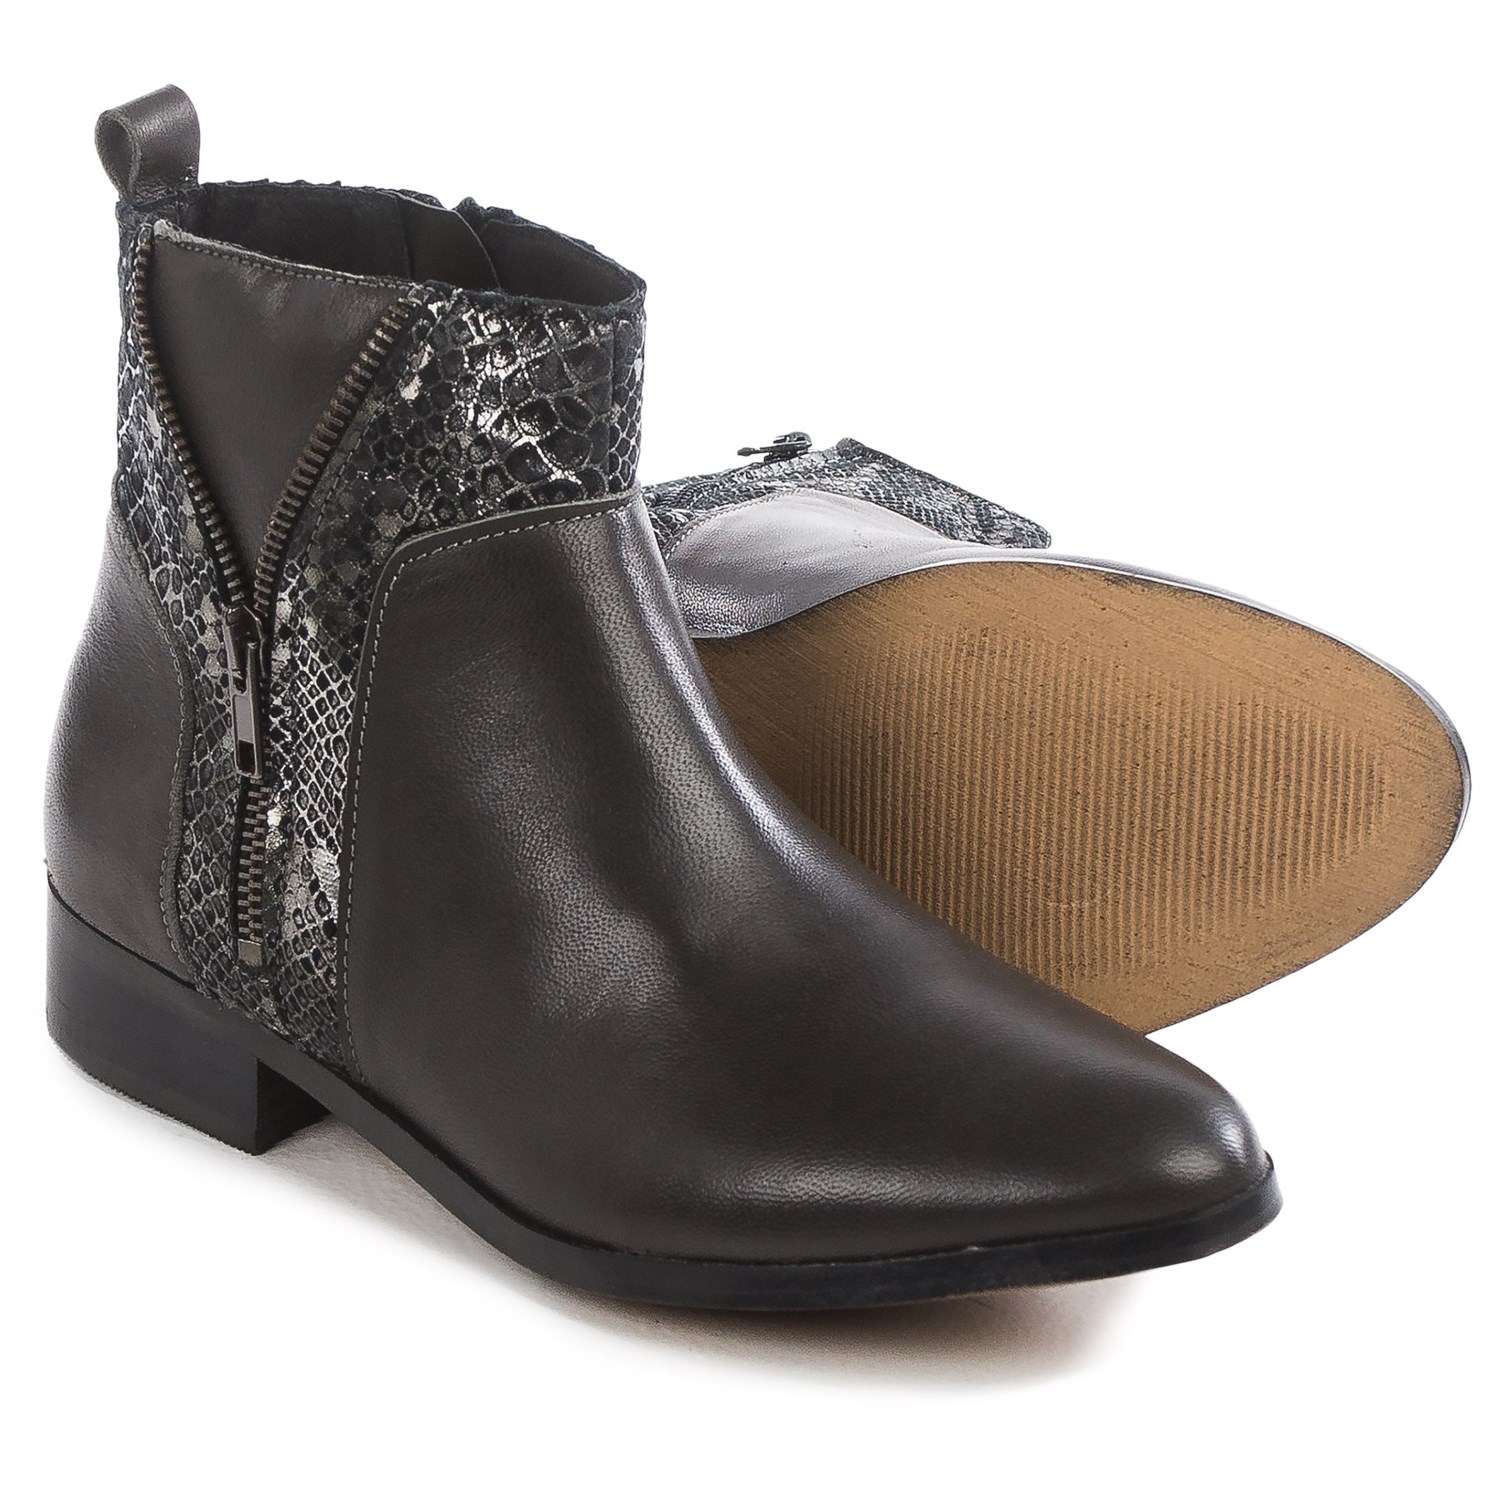 Eric Michael Modena Ankle Boots (For Women) 174WR - Save 91%